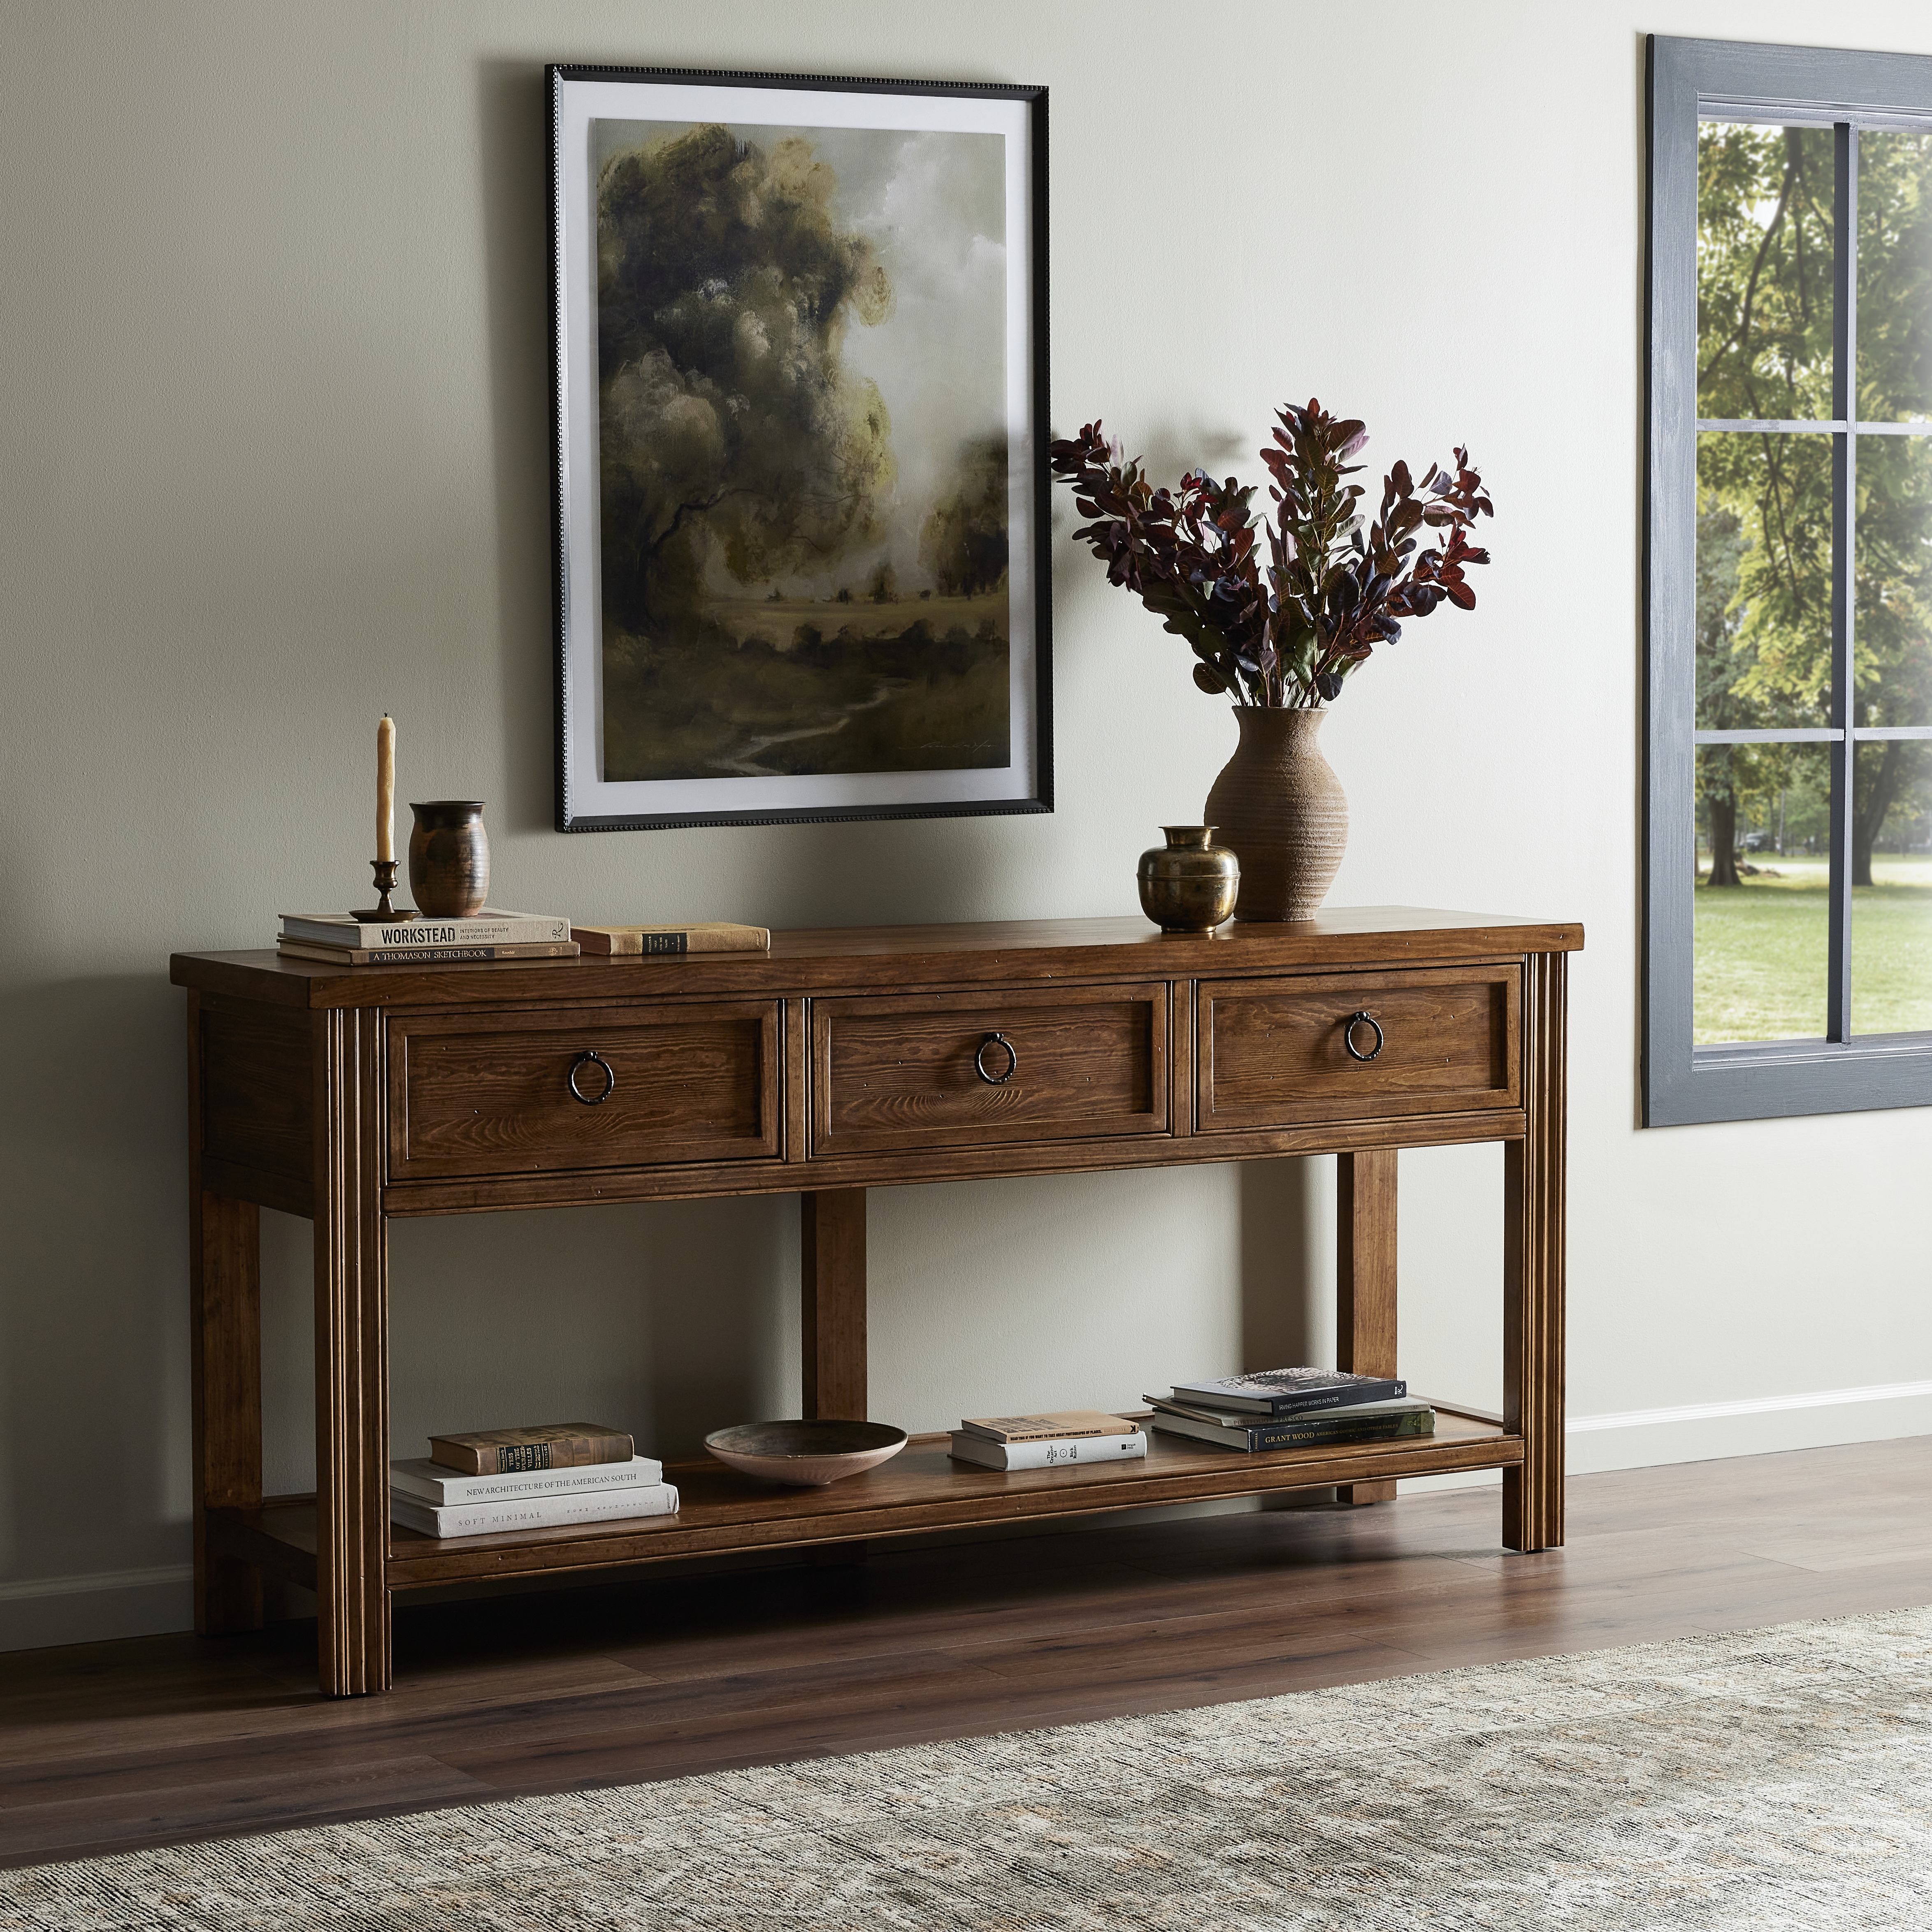 The Lazy Monsieur Partouche Table-Brown - Image 1